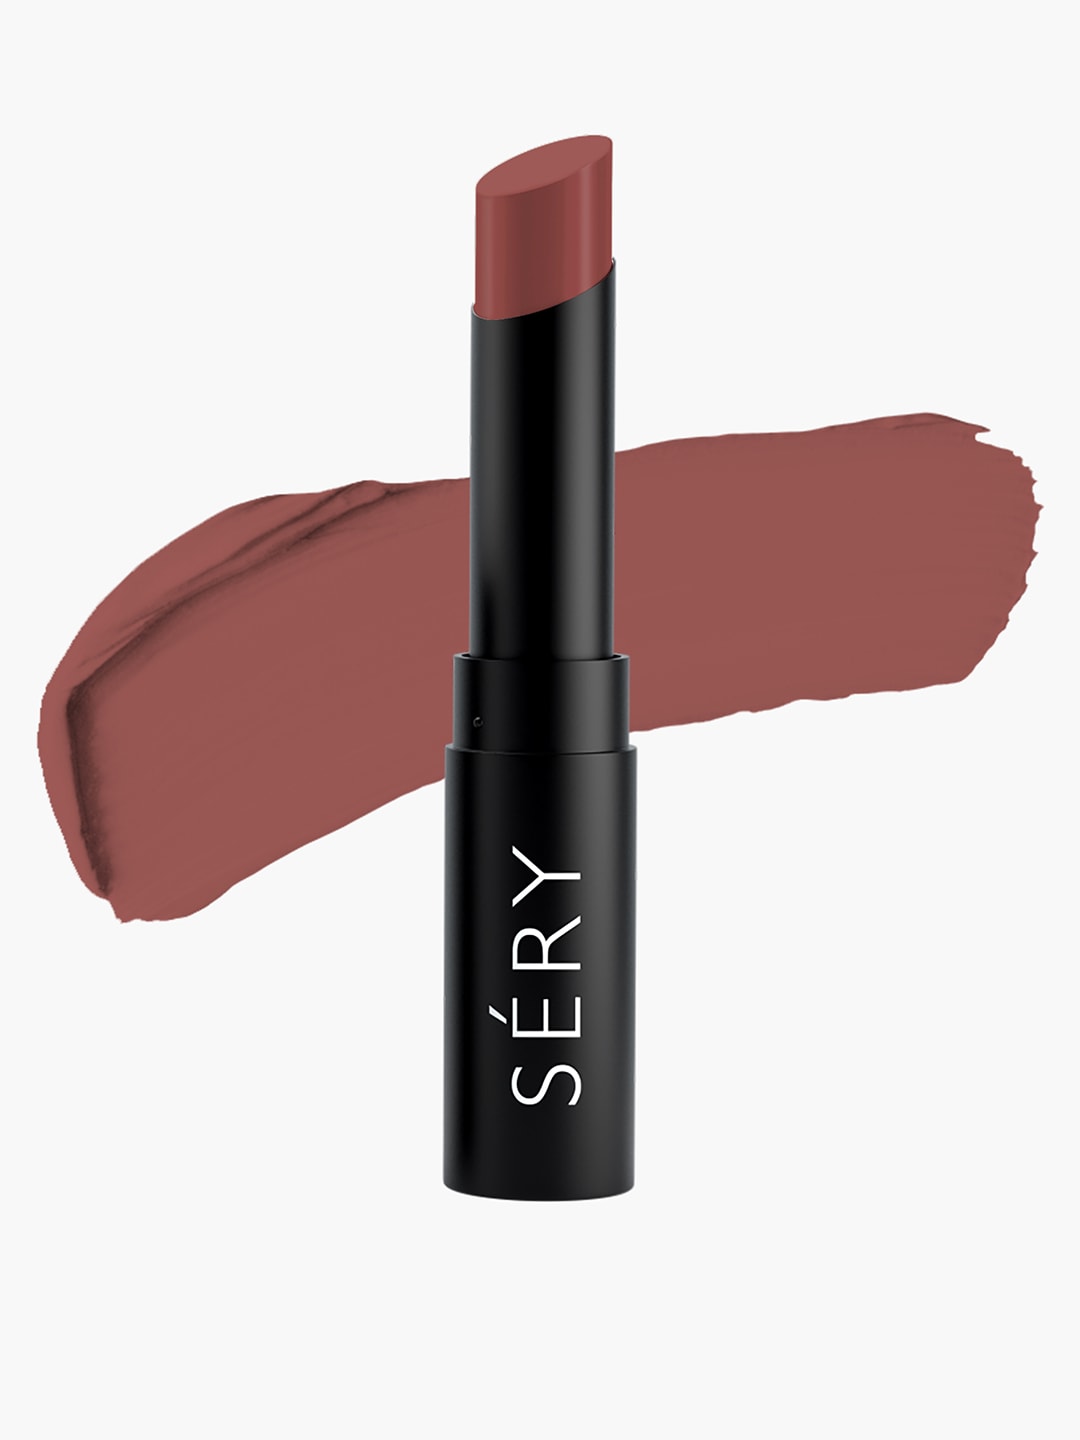 SERY Long Lasting Highly Pigmented Mattish Lipstick with Vitamin E - Honey Brown Price in India